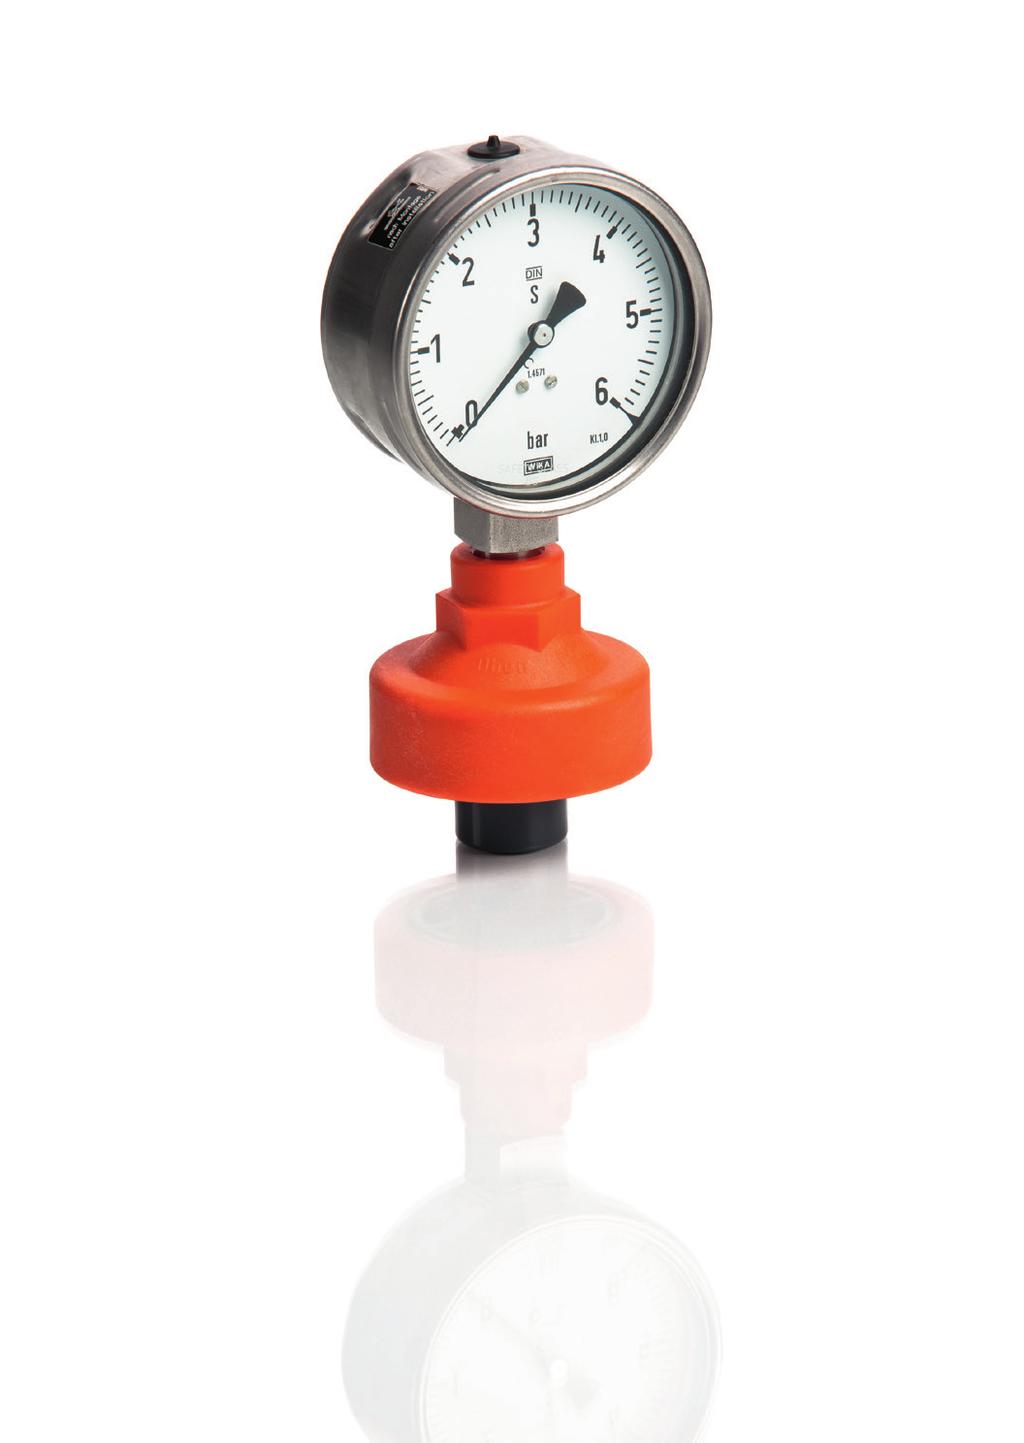 Diaphragm pressure gauge guard MDM 90 Nominal size DN 0 5 Pressure PN 10 bar Features Pressure measurement up to 10 bar EPDM diaphragm with PTFE coating on the side in contact with the medium